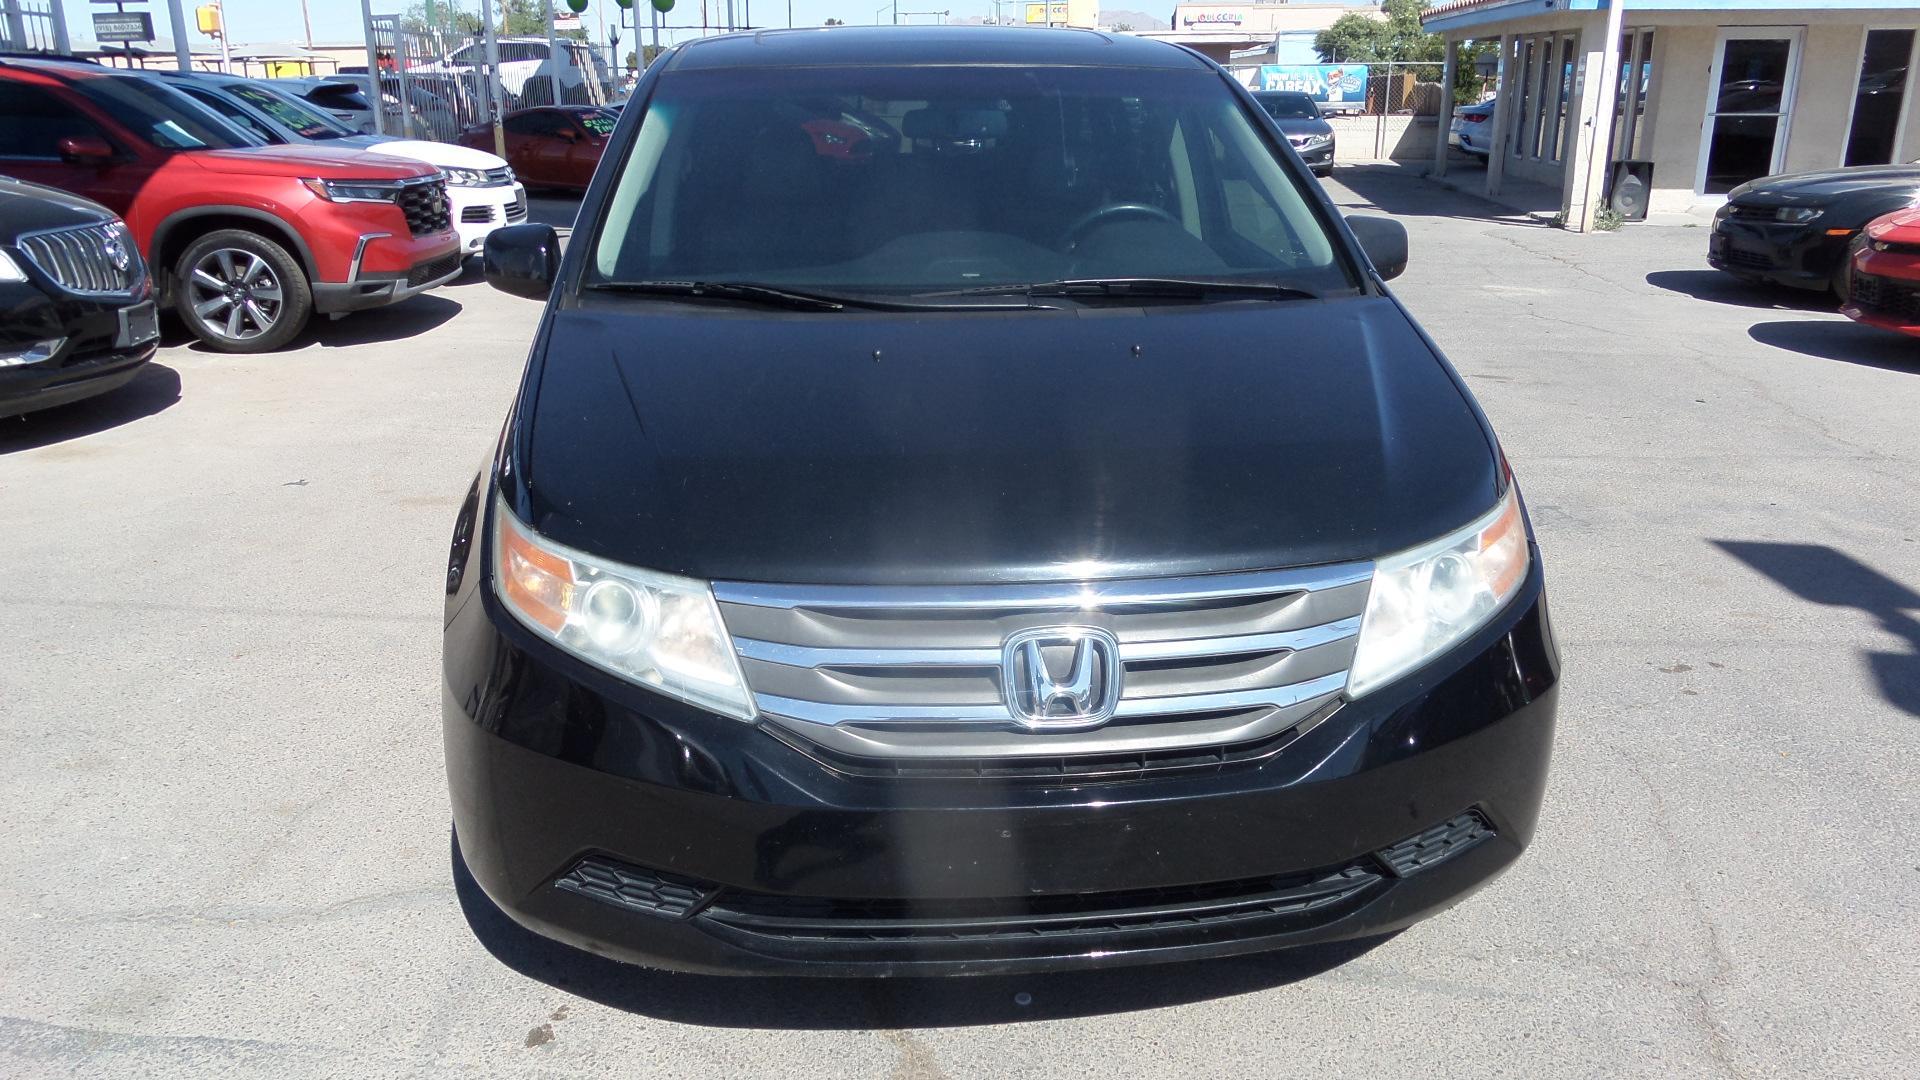 Used 2011 Honda Odyssey EX-L with VIN 5FNRL5H68BB038679 for sale in El Paso, TX